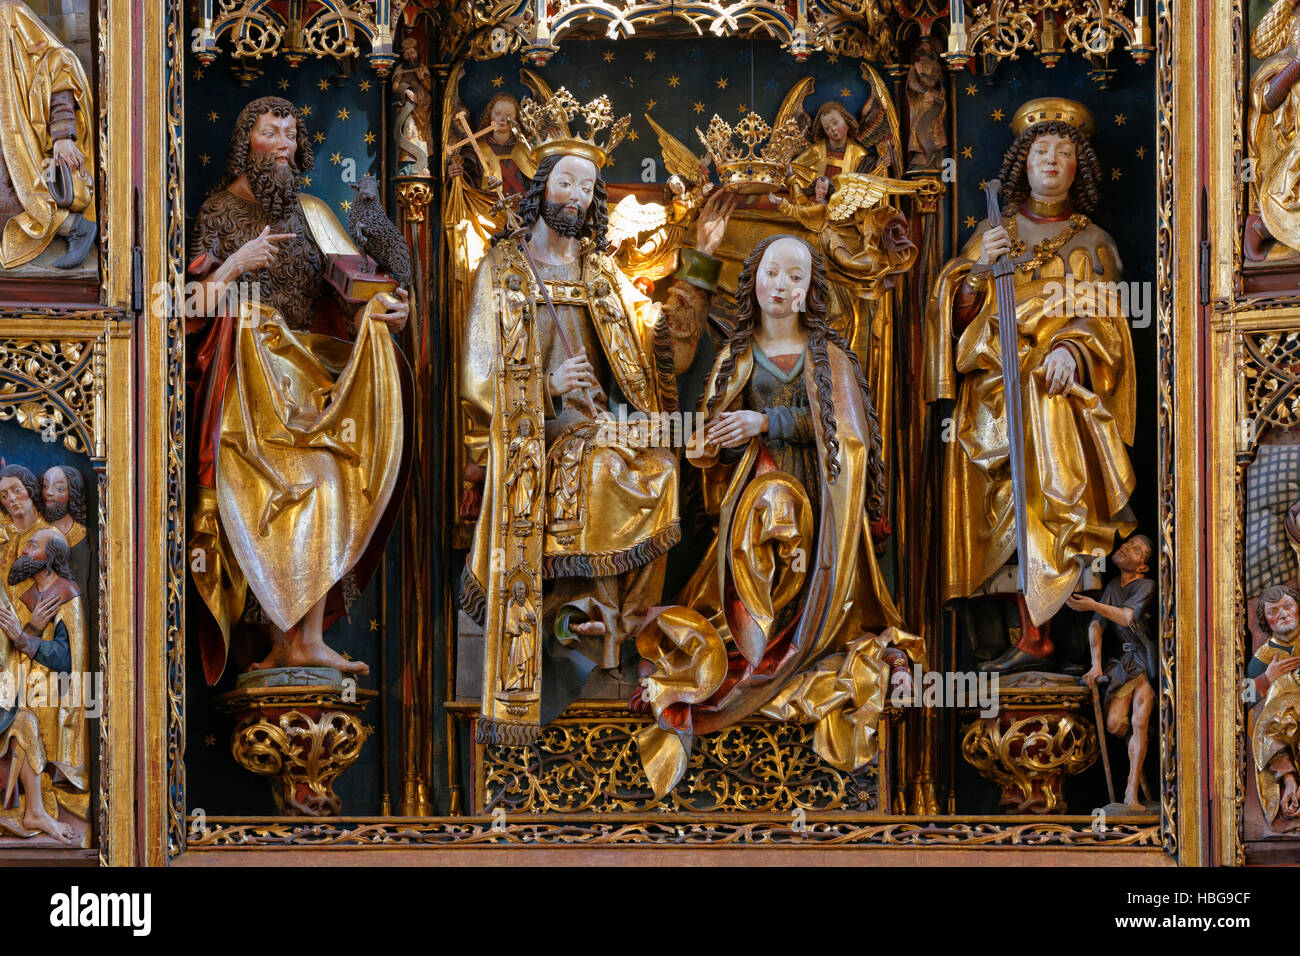 Coronation of the Virgin in Schwabacher Altar, Church of St. John and St. Martin, Schwabach, Middle Franconia, Franconia Stock Photo